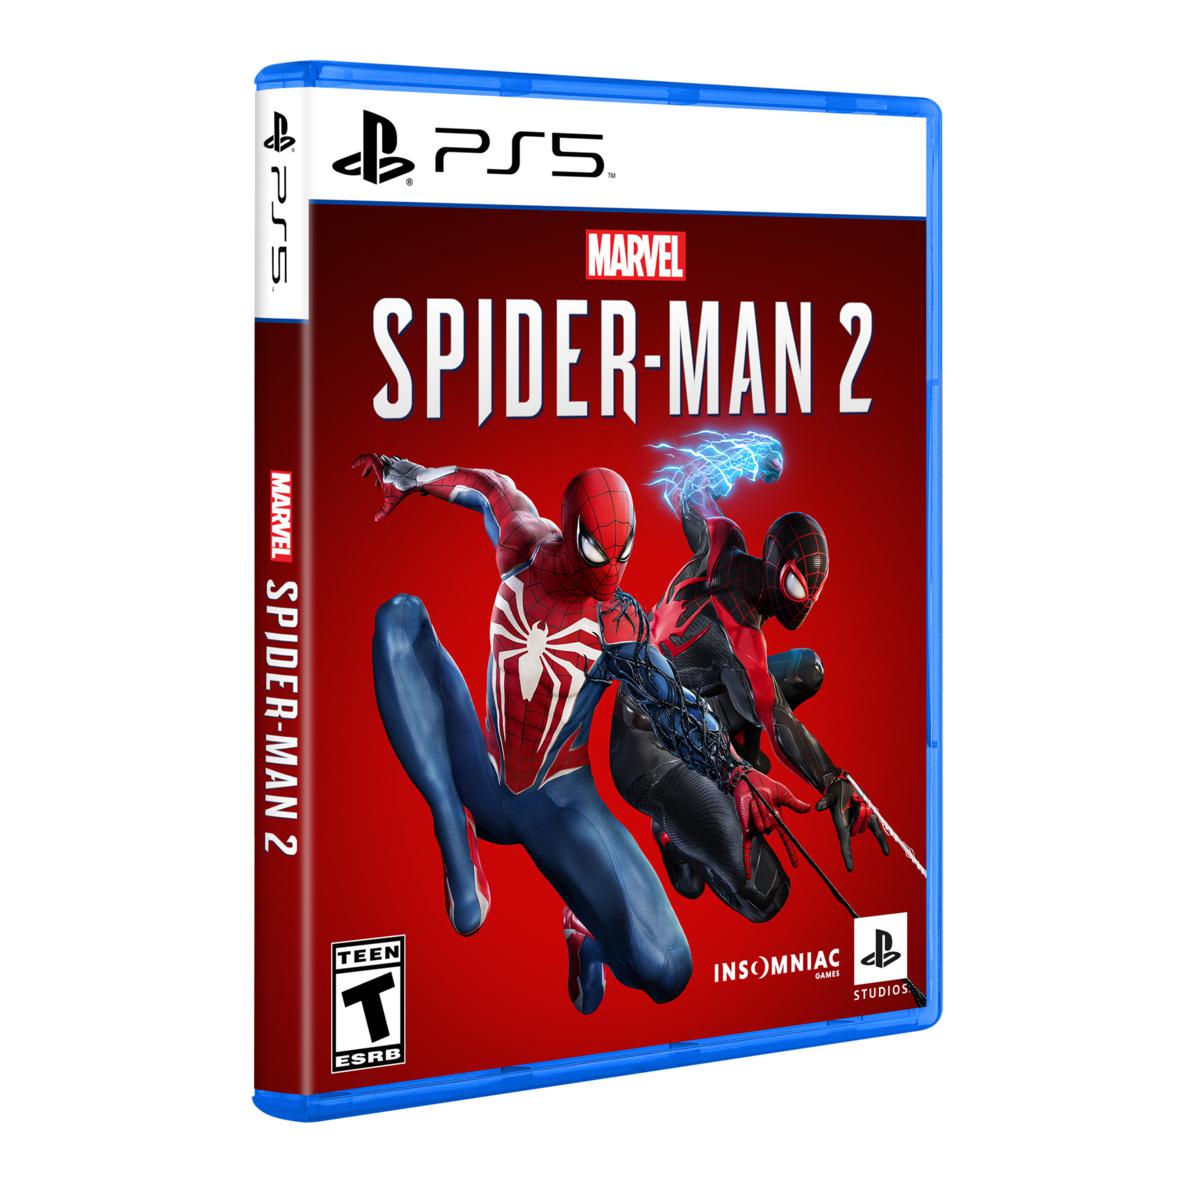 HSN New Customers: Marvels Spiderman 2 (PS5 exclusive) $43 w/Free Shipping $42.99